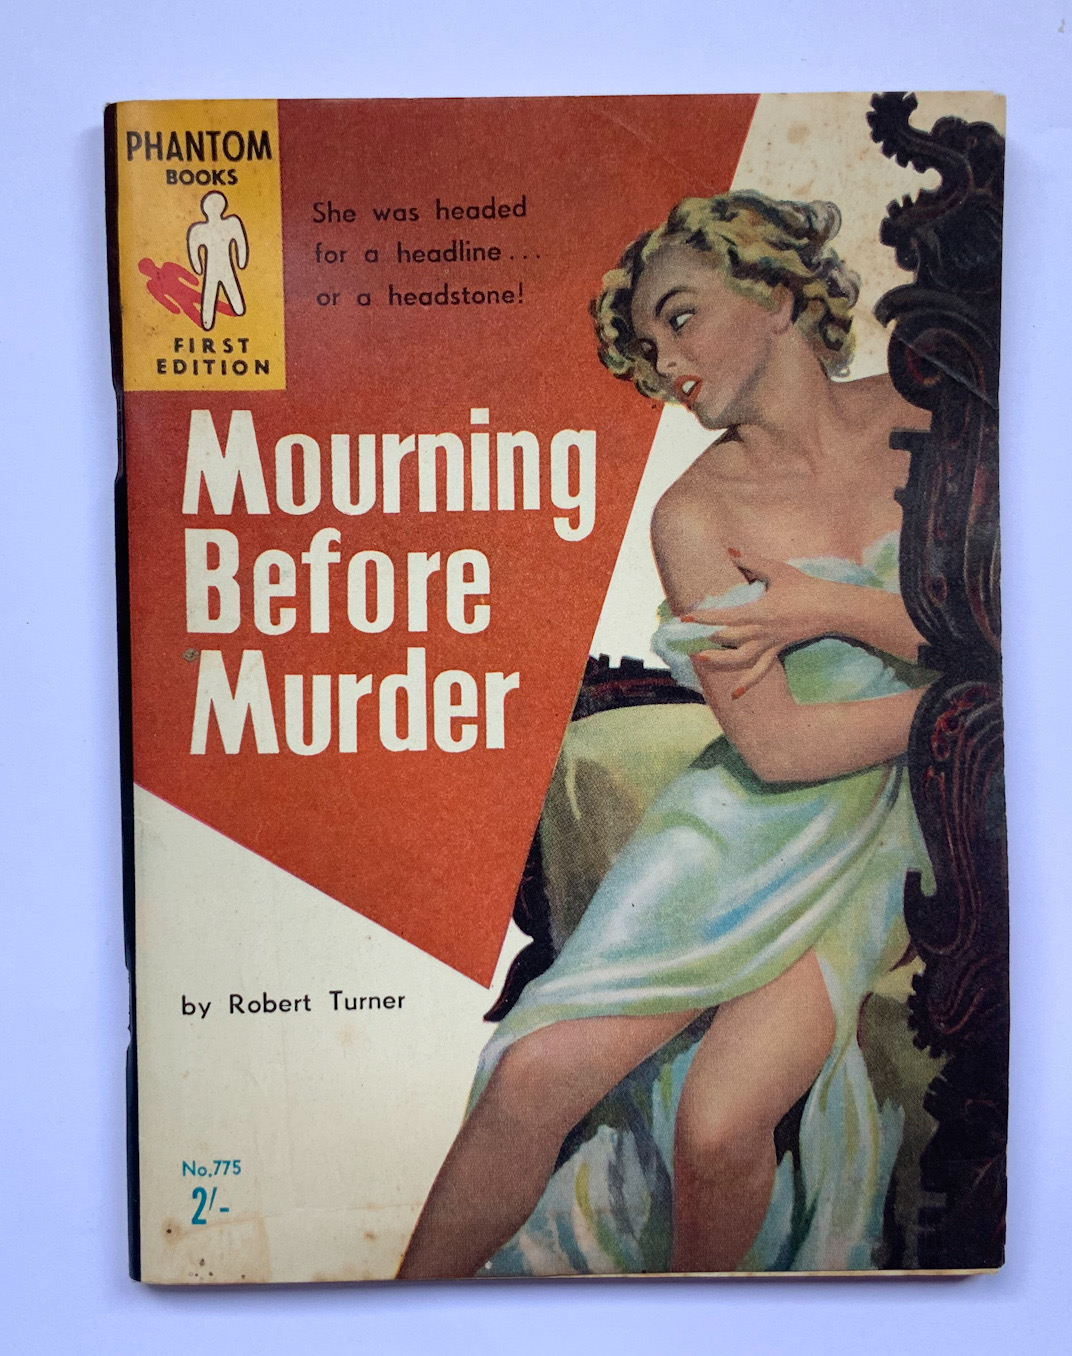 MOURNING BEFORE MURDER Australian crime pulp fiction book by Robert Turner 1958